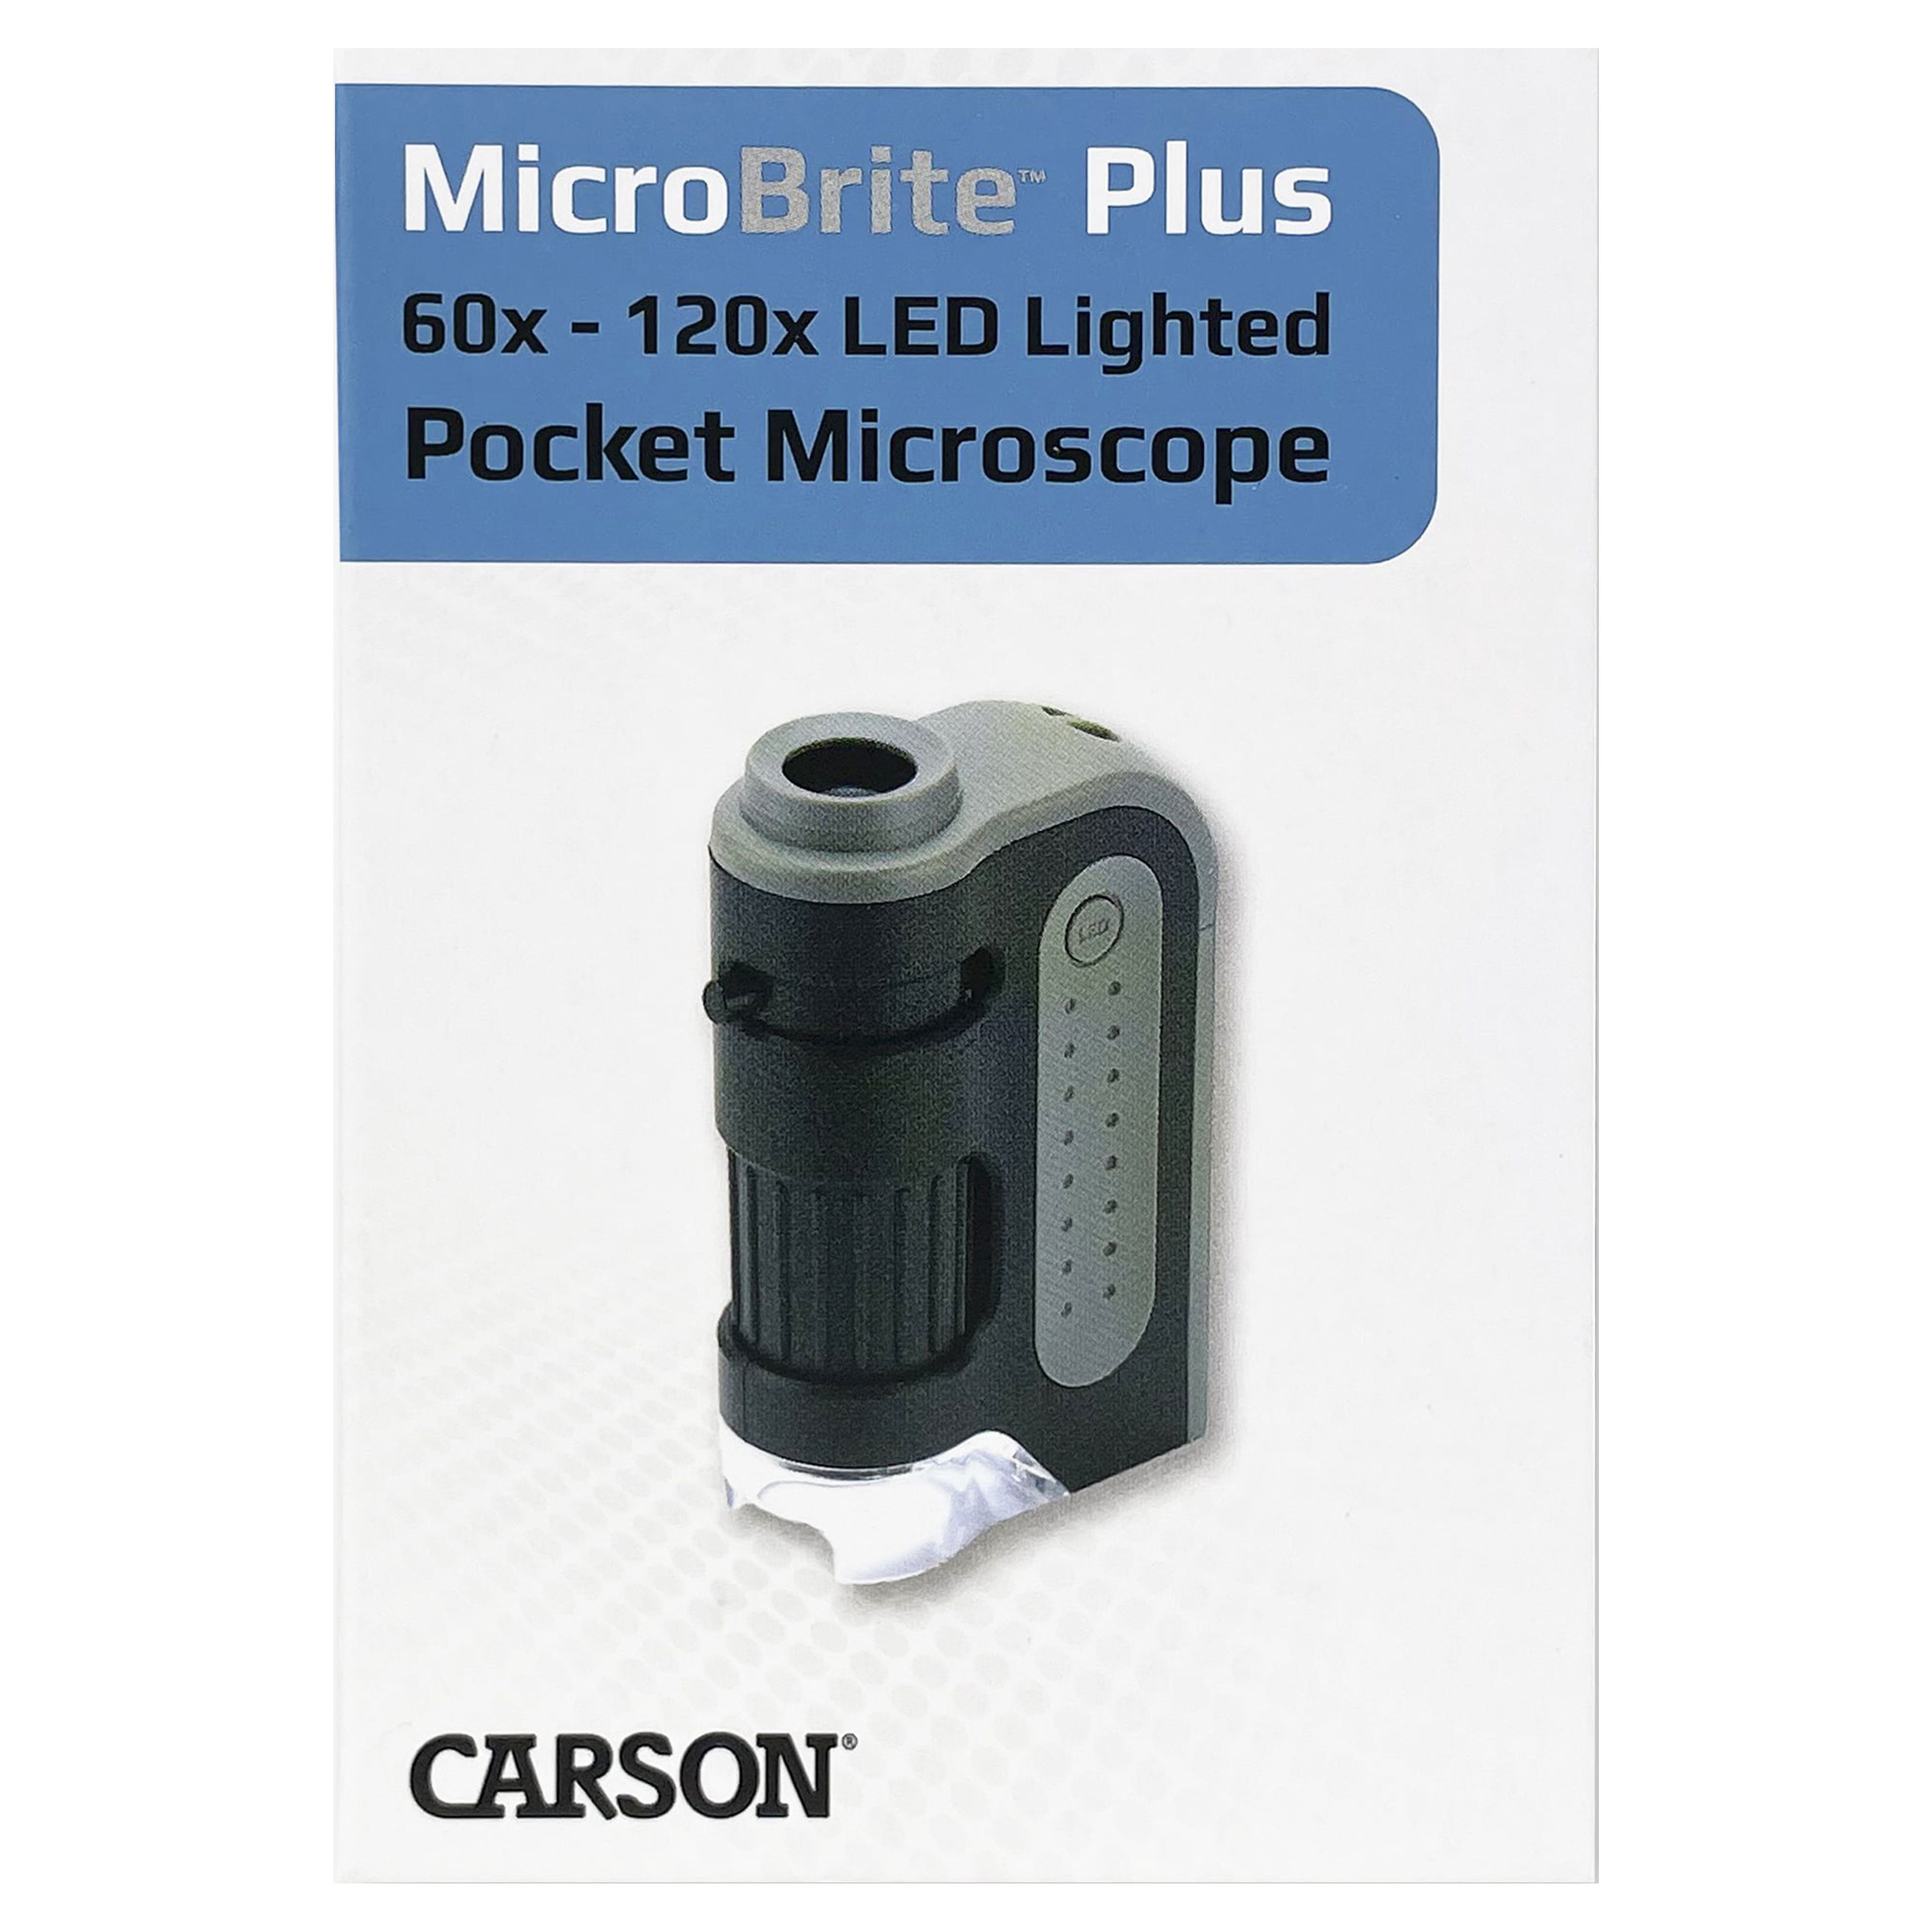 Carson MicroBrite™ Plus 60x - 120x LED Lighted Portable Pocket Microscope for Kids & Adults - image 7 of 9